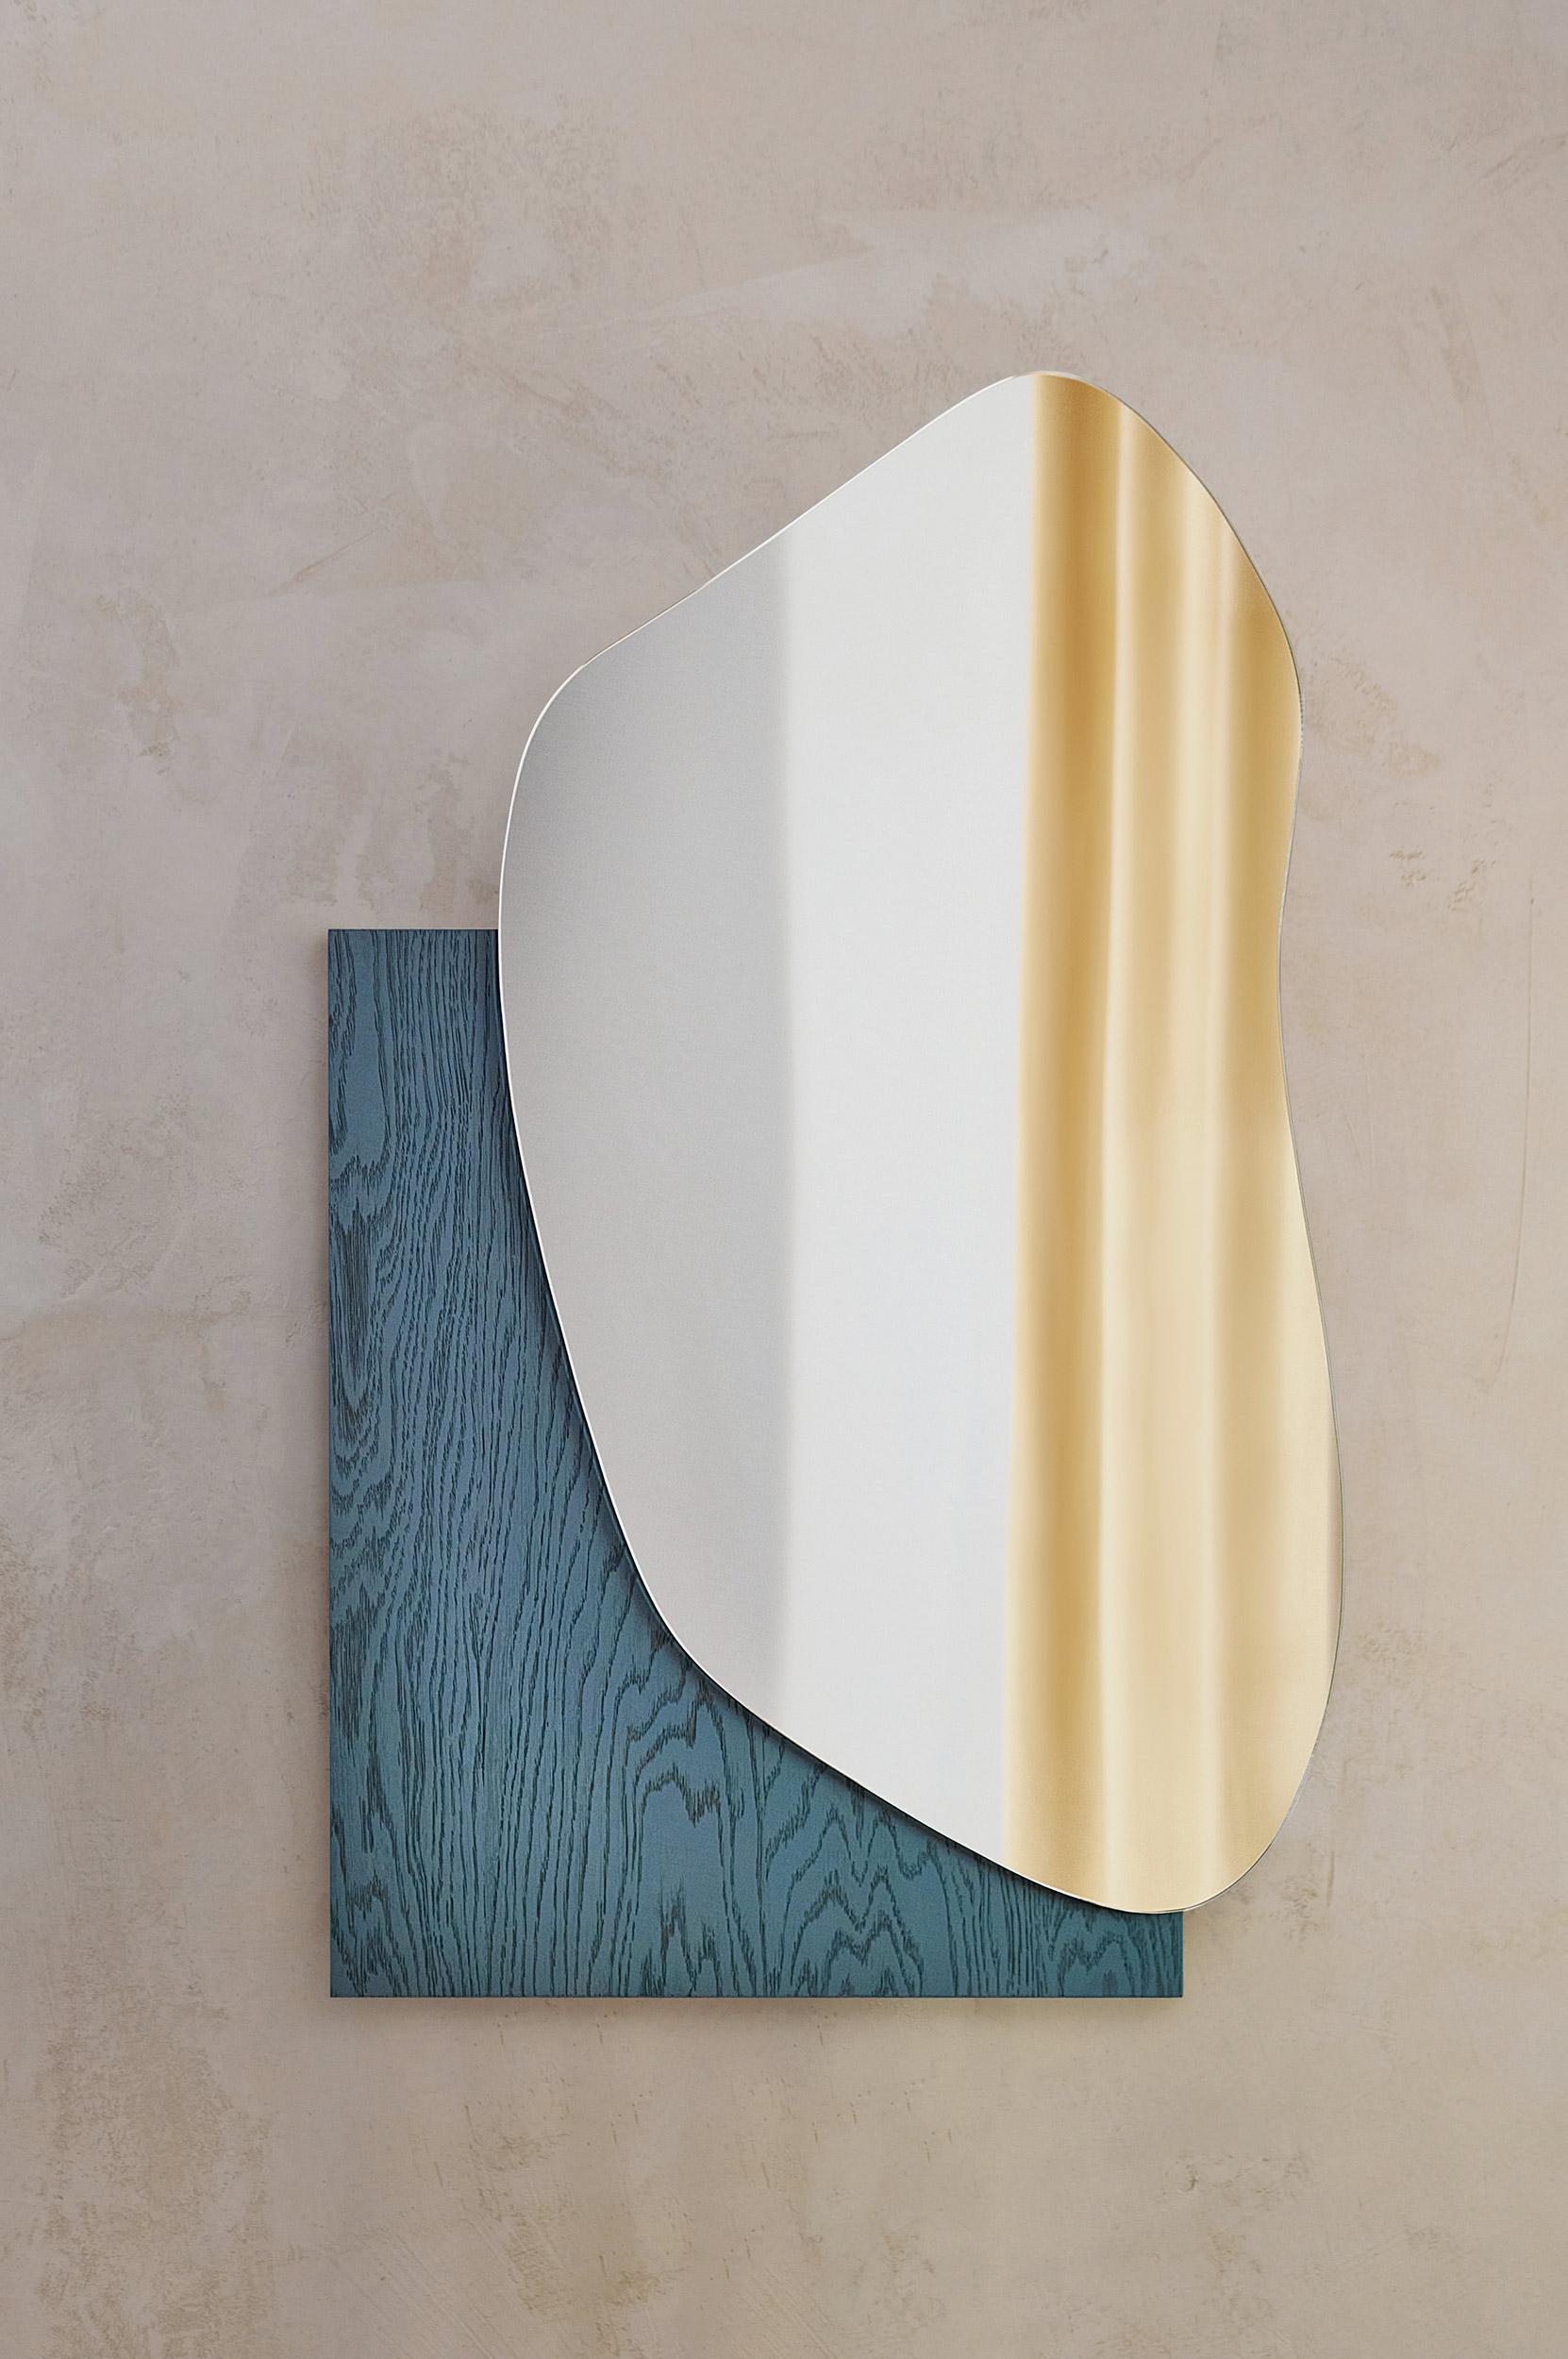 Modern Lake Wall Mirror by Noom
Designers: Maryna Dague & Nathan Baraness

Model shown in picture:
Number 1
Green veneered wood

